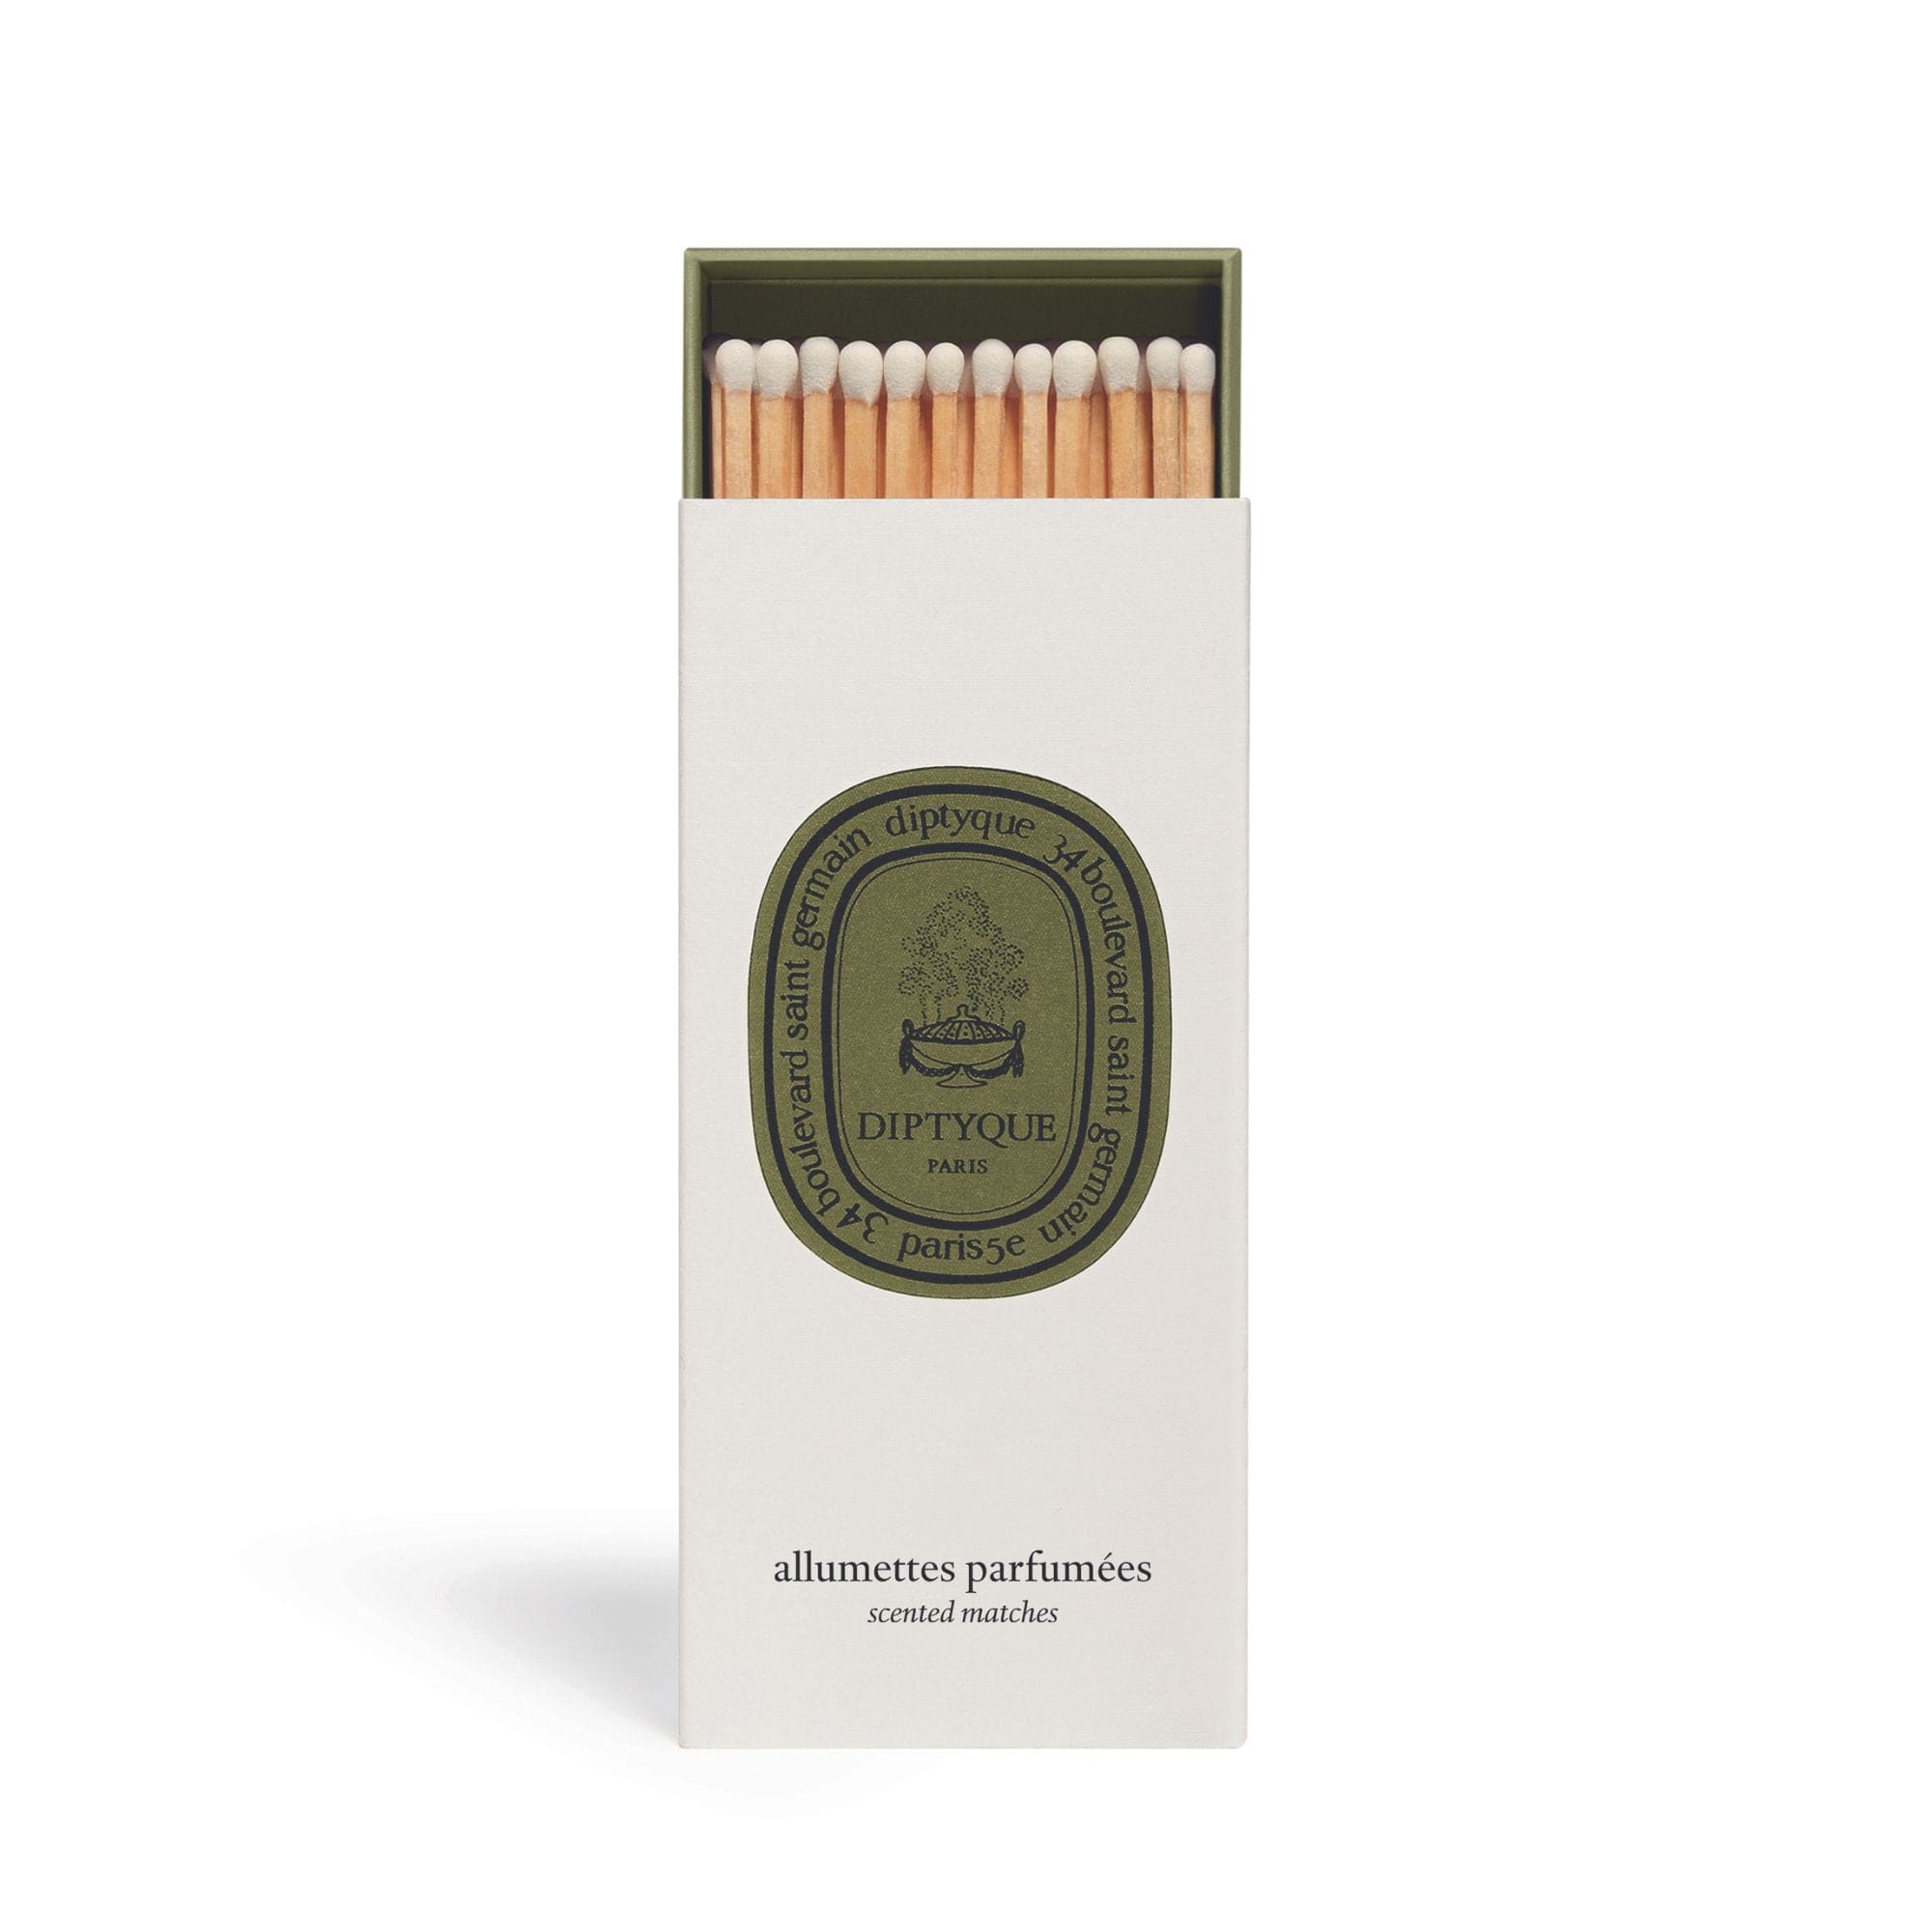 Scented Matches Temple de Mousses Diptyque Scented matches